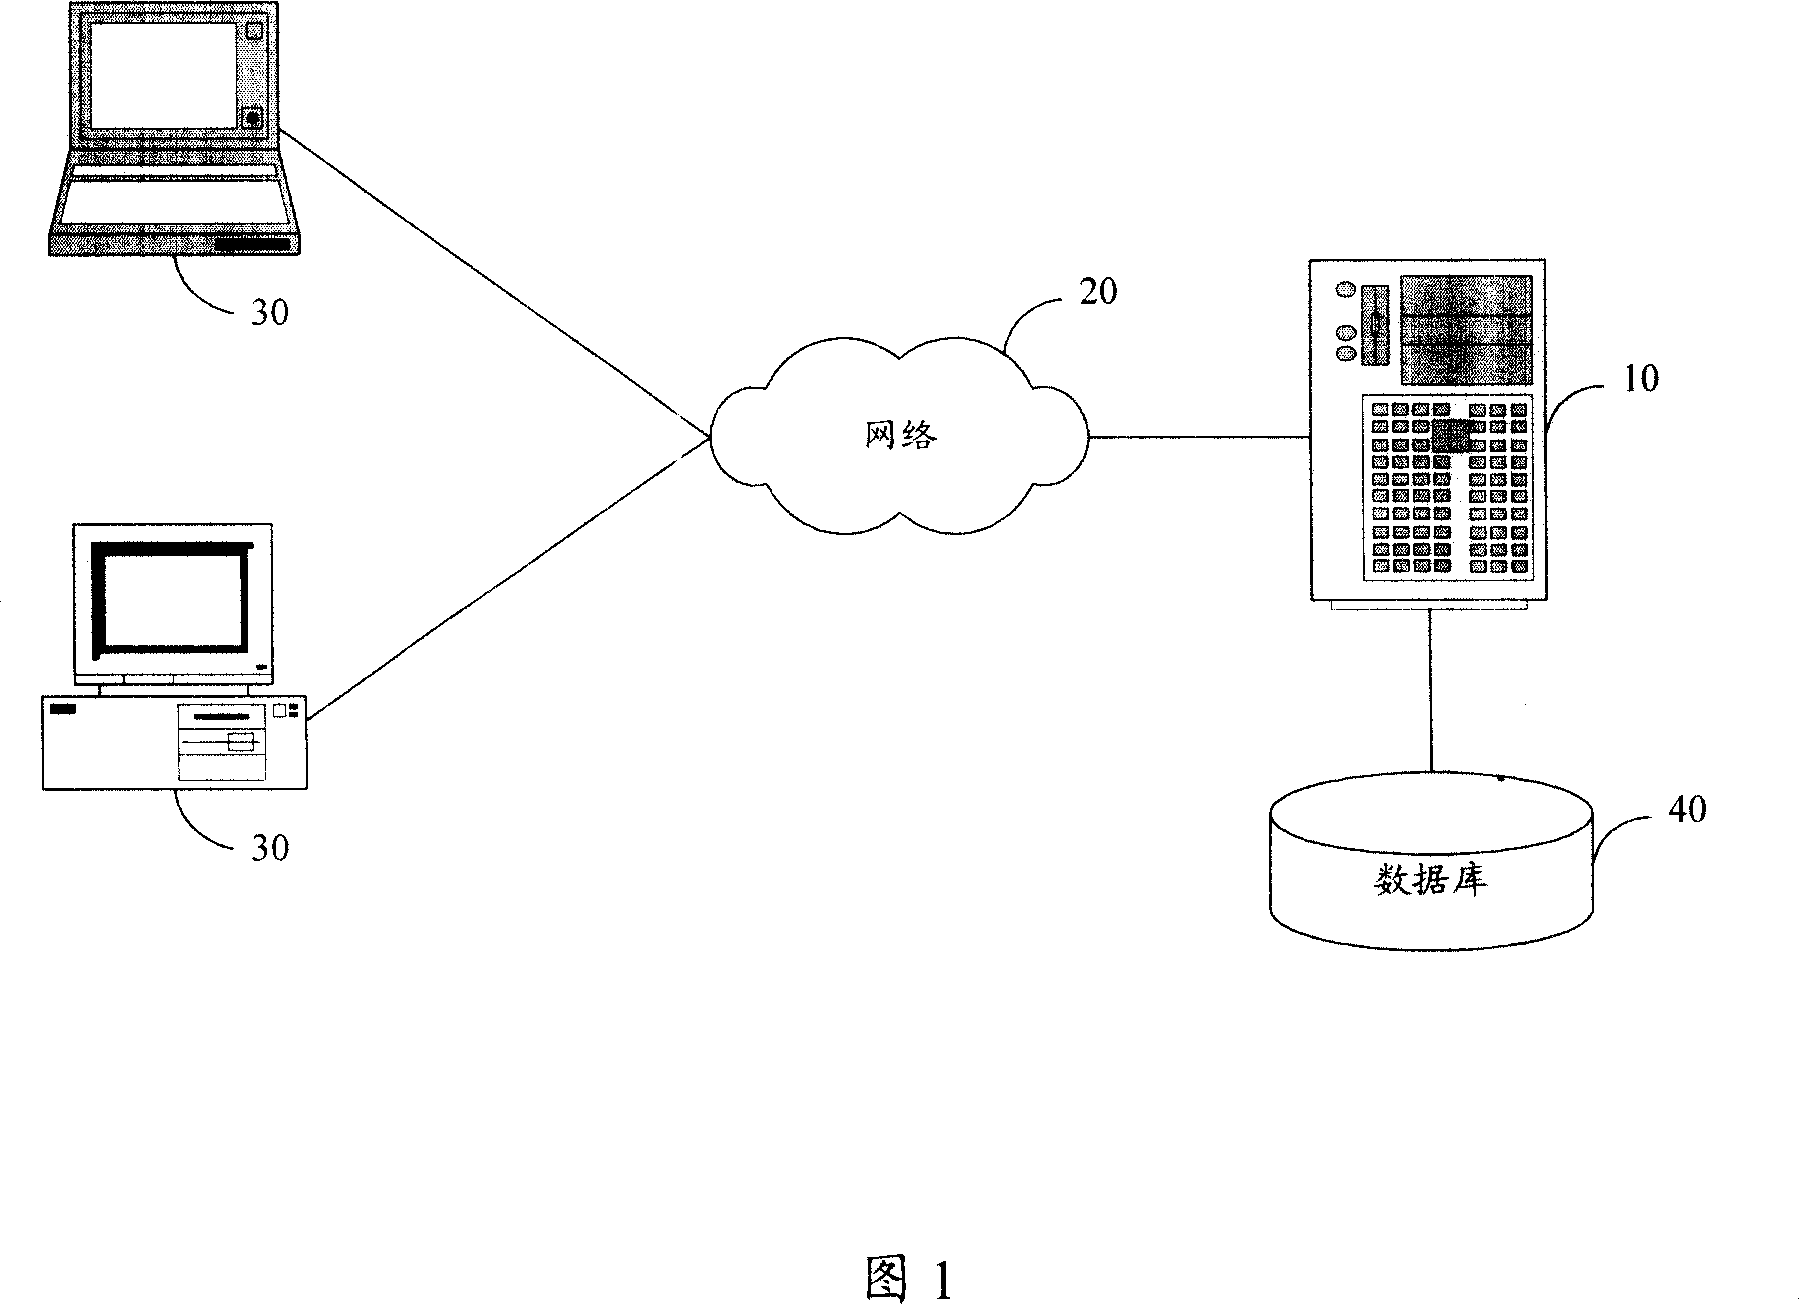 Contracted life cycle supervision system and method